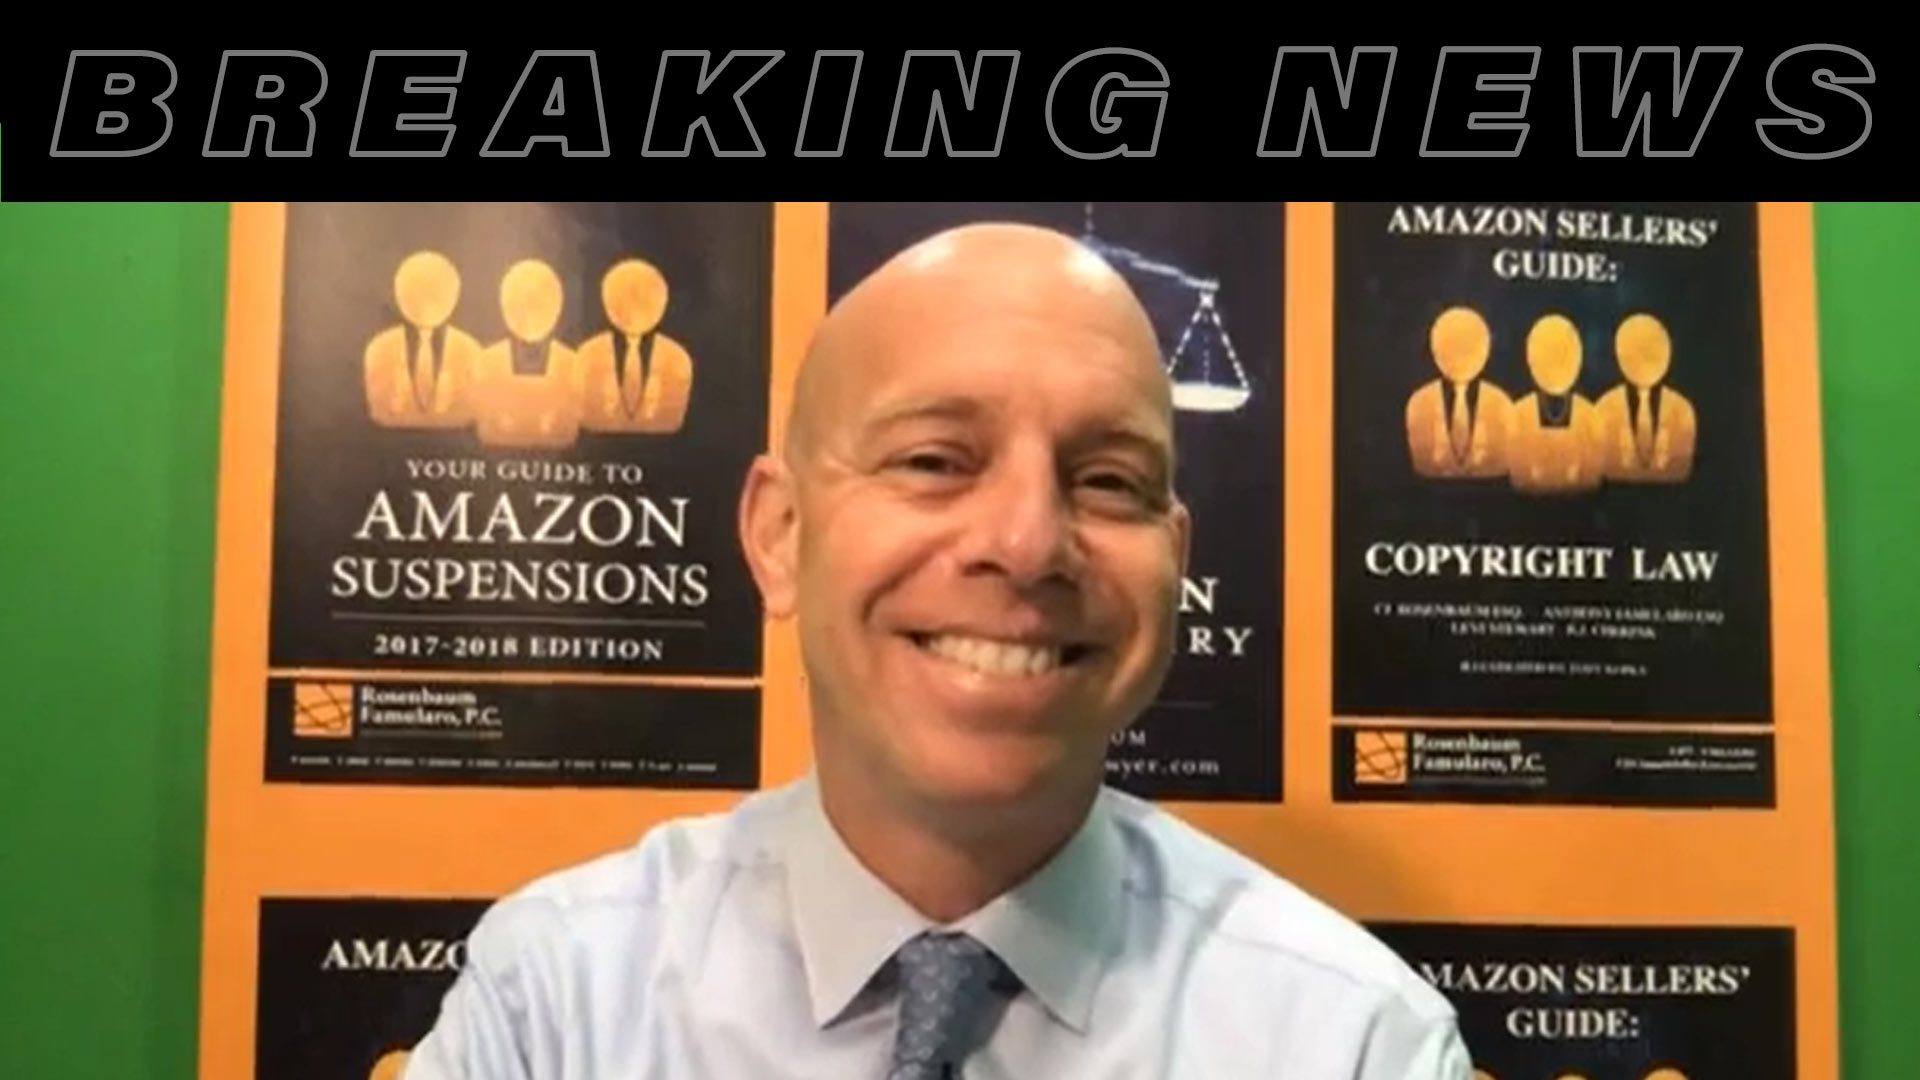 Breaking News for Amazon Sellers 5-16-19